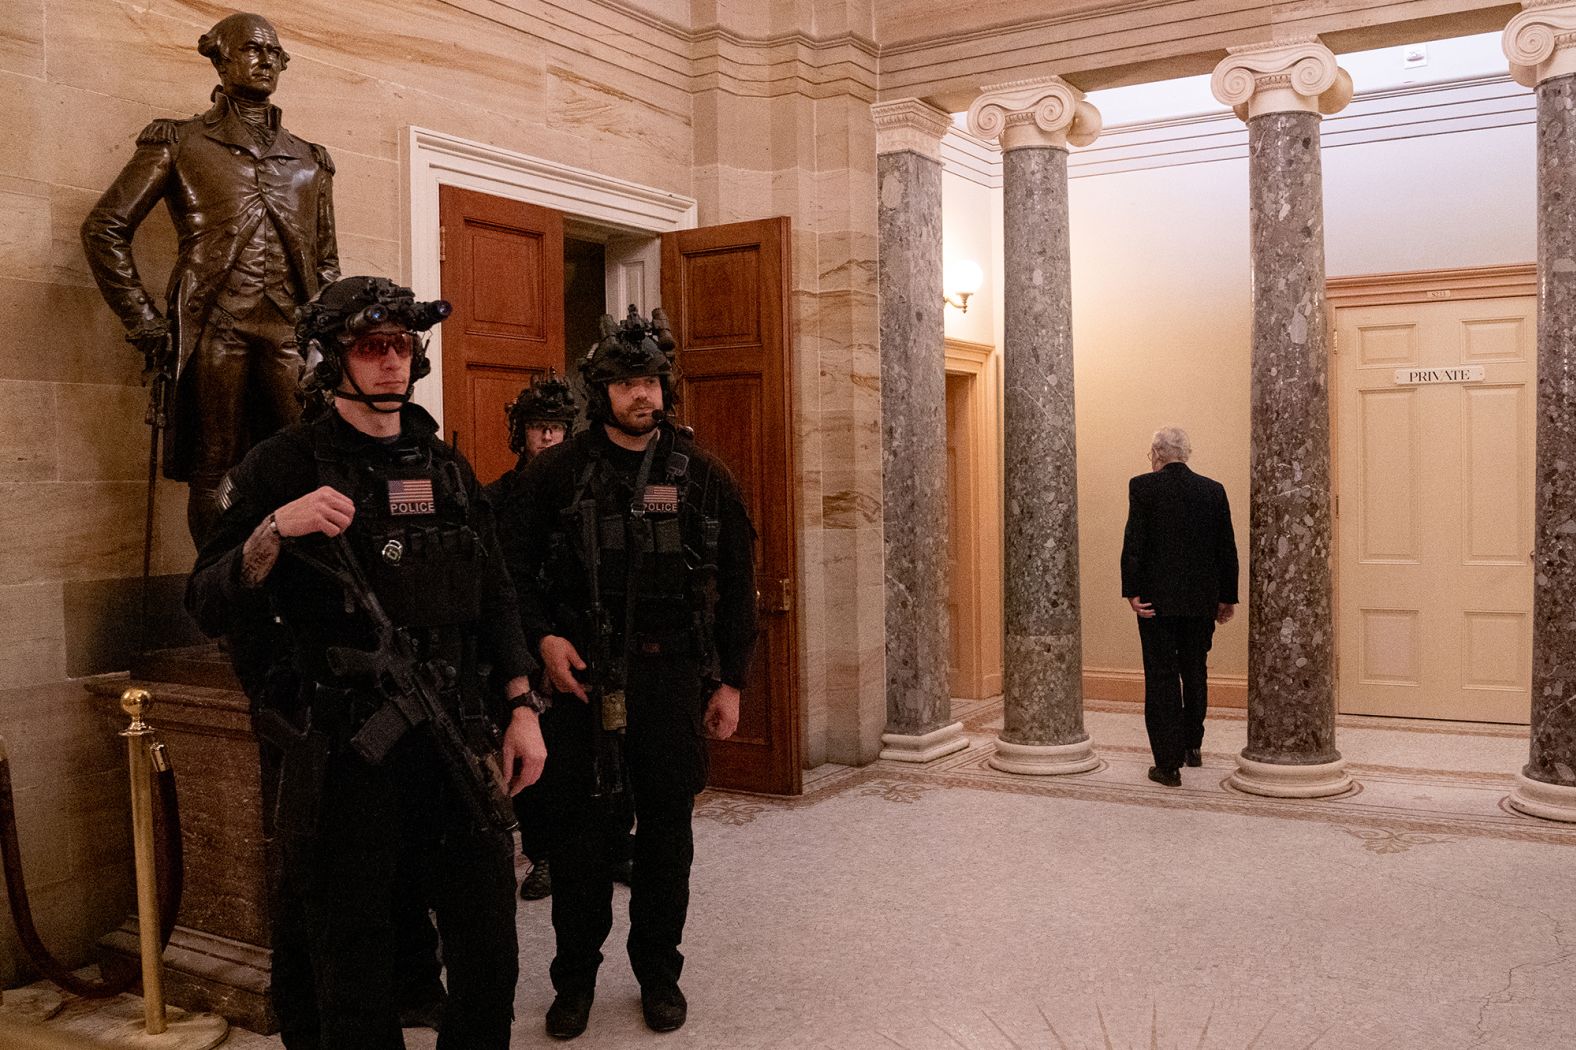 McConnell, right, walks past armed police at the US Capitol after <a href="index.php?page=&url=http%3A%2F%2Fwww.cnn.com%2F2022%2F01%2F03%2Fpolitics%2Fgallery%2Fjanuary-6-capitol-insurrection%2Findex.html" target="_blank">the riot on January 6, 2021</a>. 